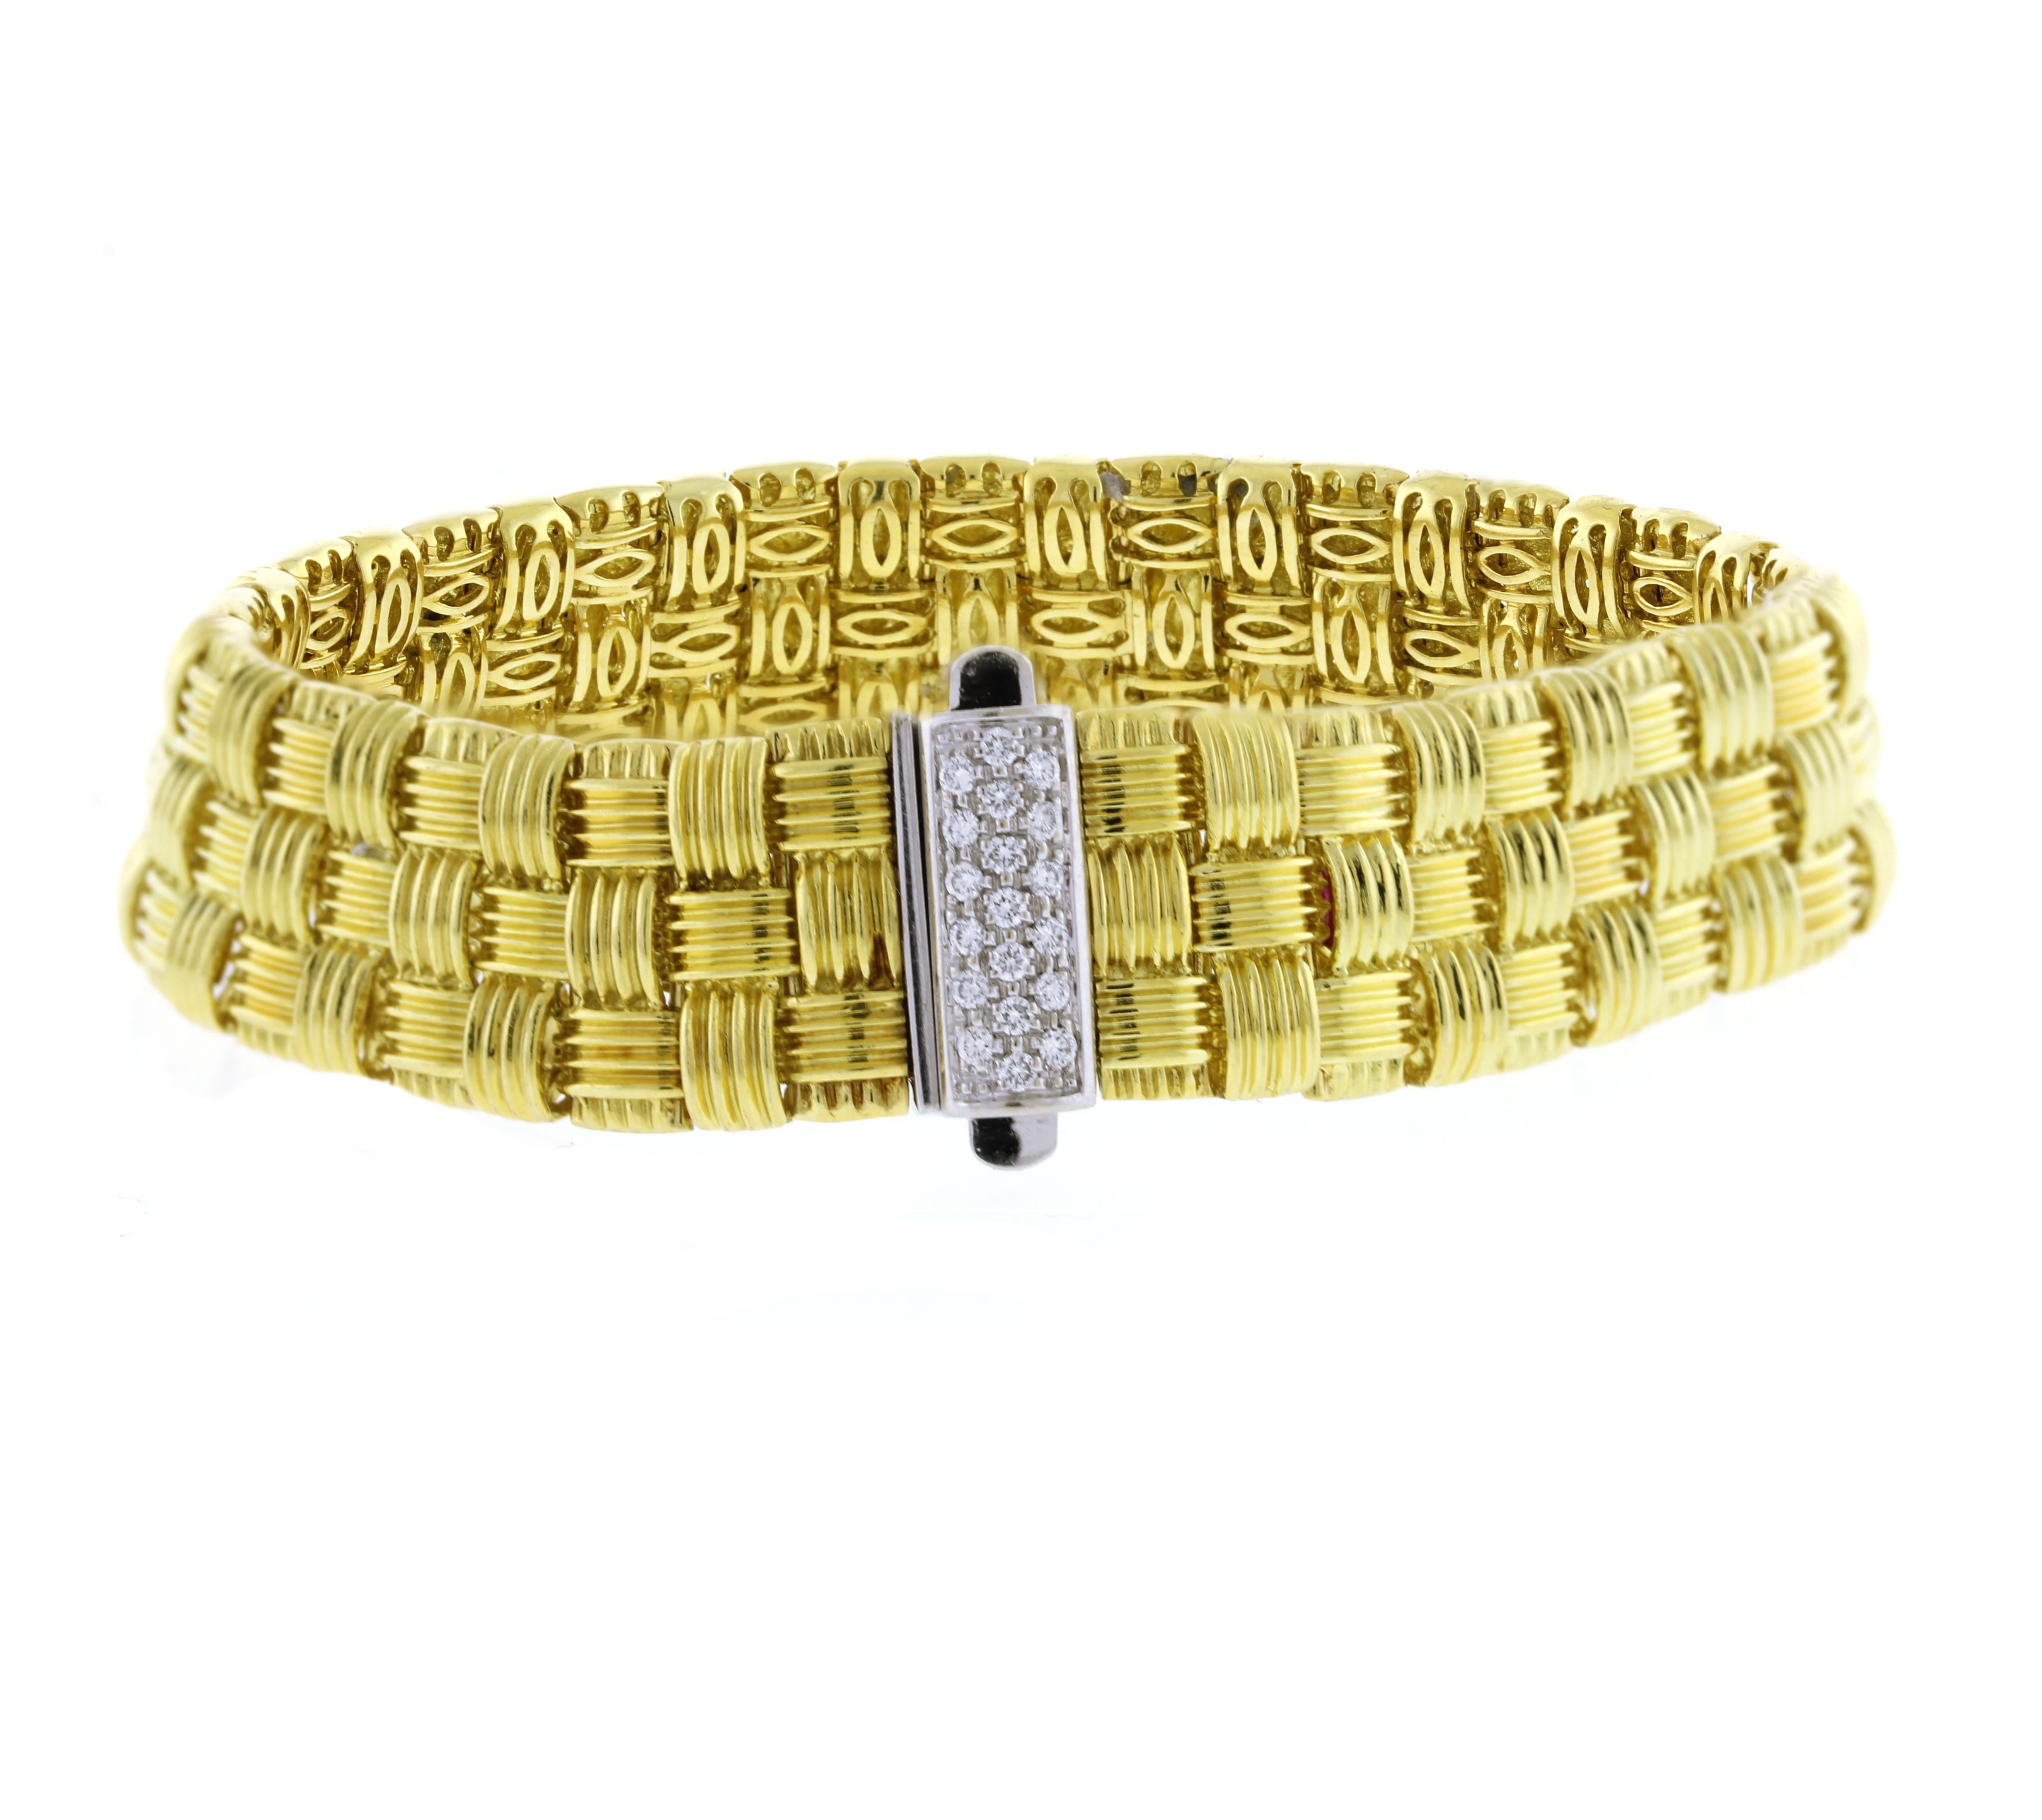 This Roberto Coin diamond bracelet is showcased of the Appassionata collection. Considered a work of art, the 18kt yellow gold piece features three woven rows, creating a basket weave pattern that is rich and luxurious. 
♦ Designer: Roberto Coin
♦